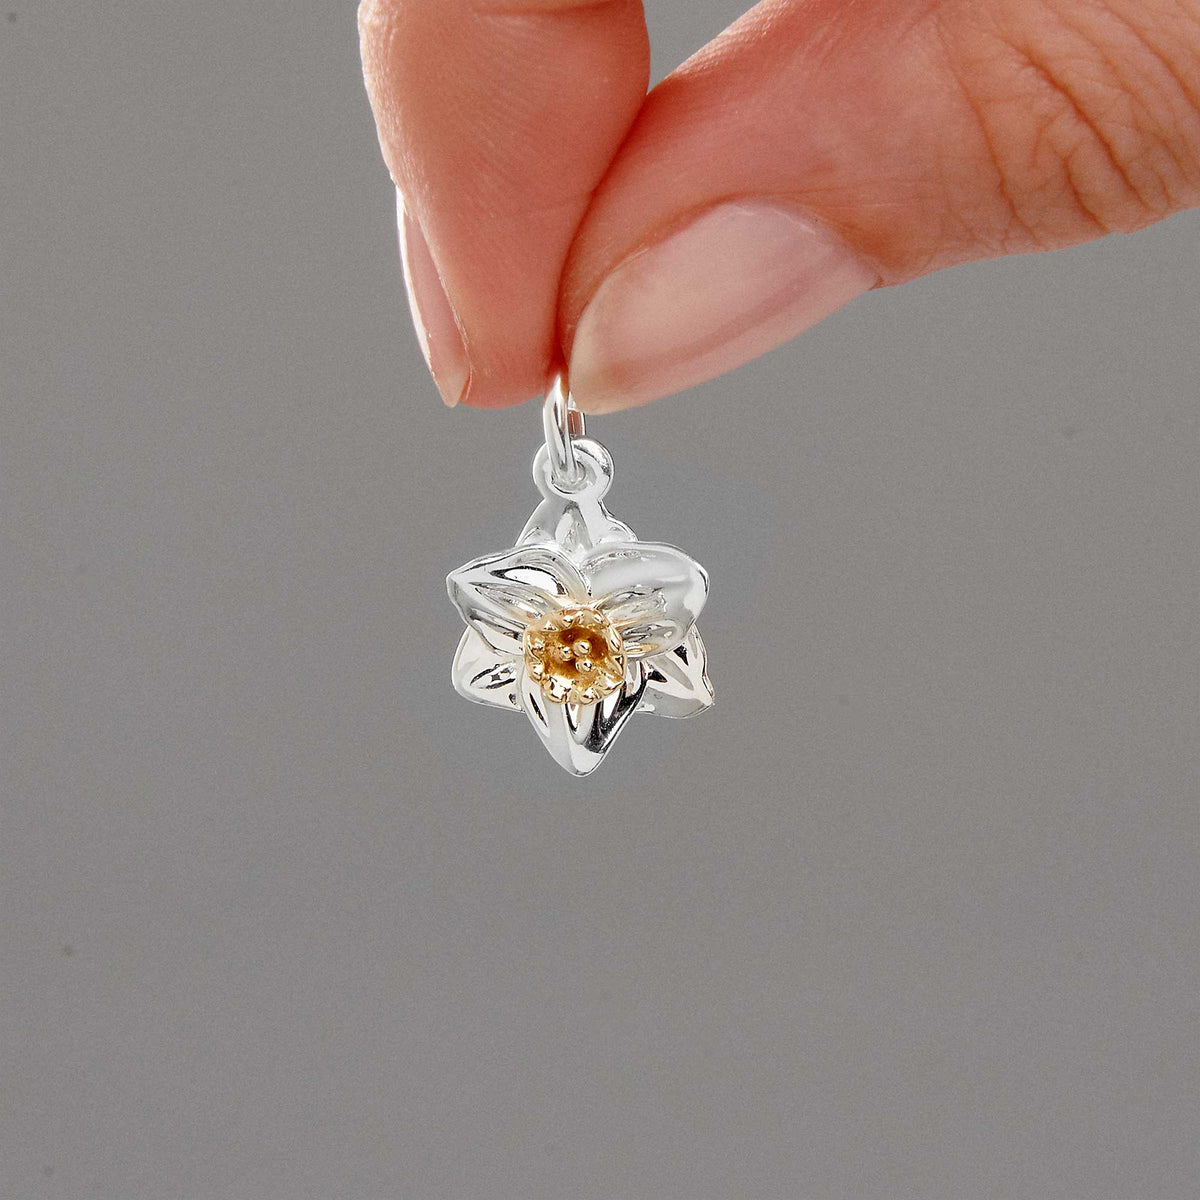 silver daffodil charm with solid gold trumpet scarlett jewellery for chelsea flower shw